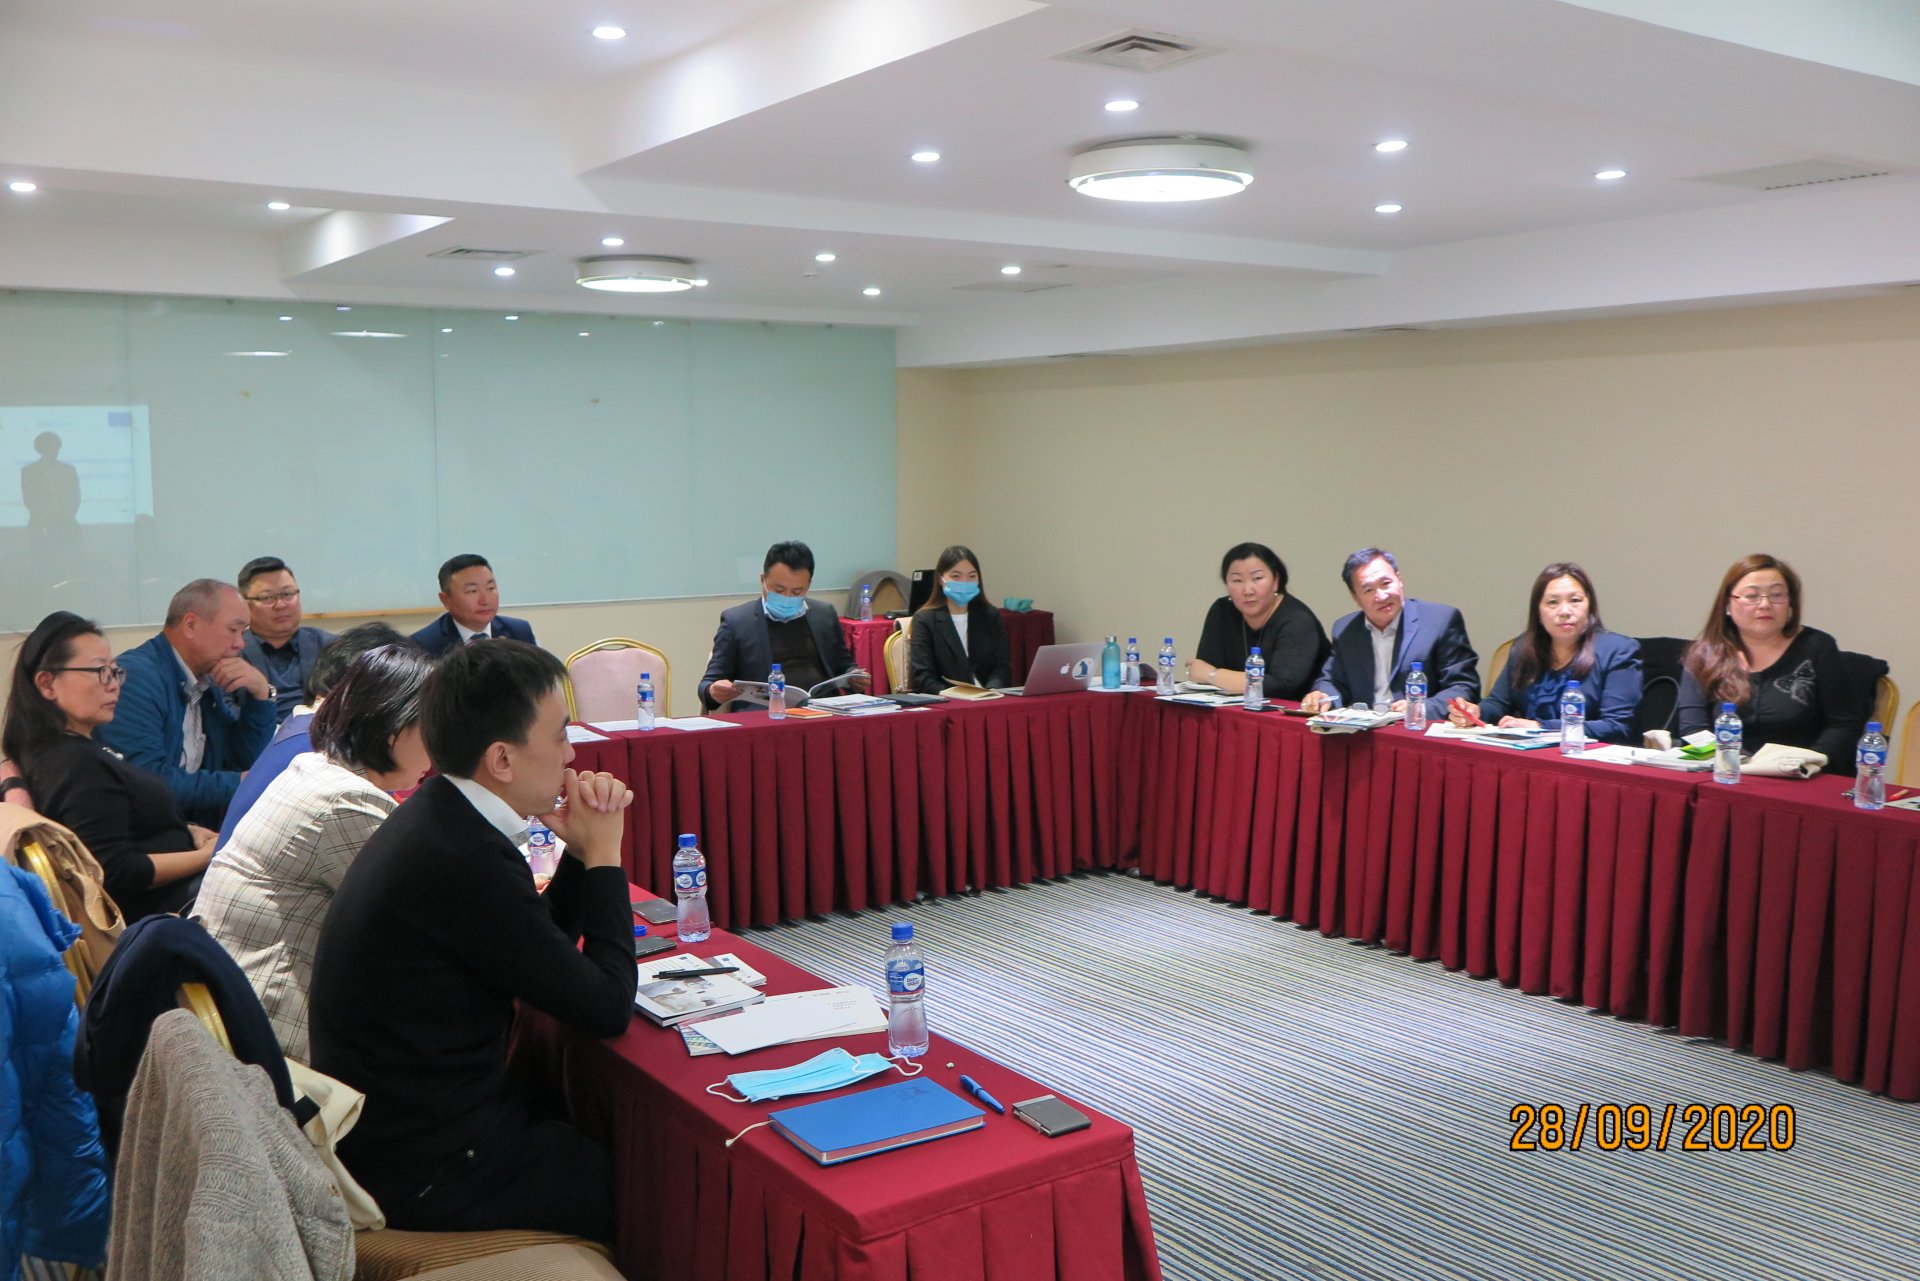 The regular Steering Committee meeting for STeP EcoLab project was held